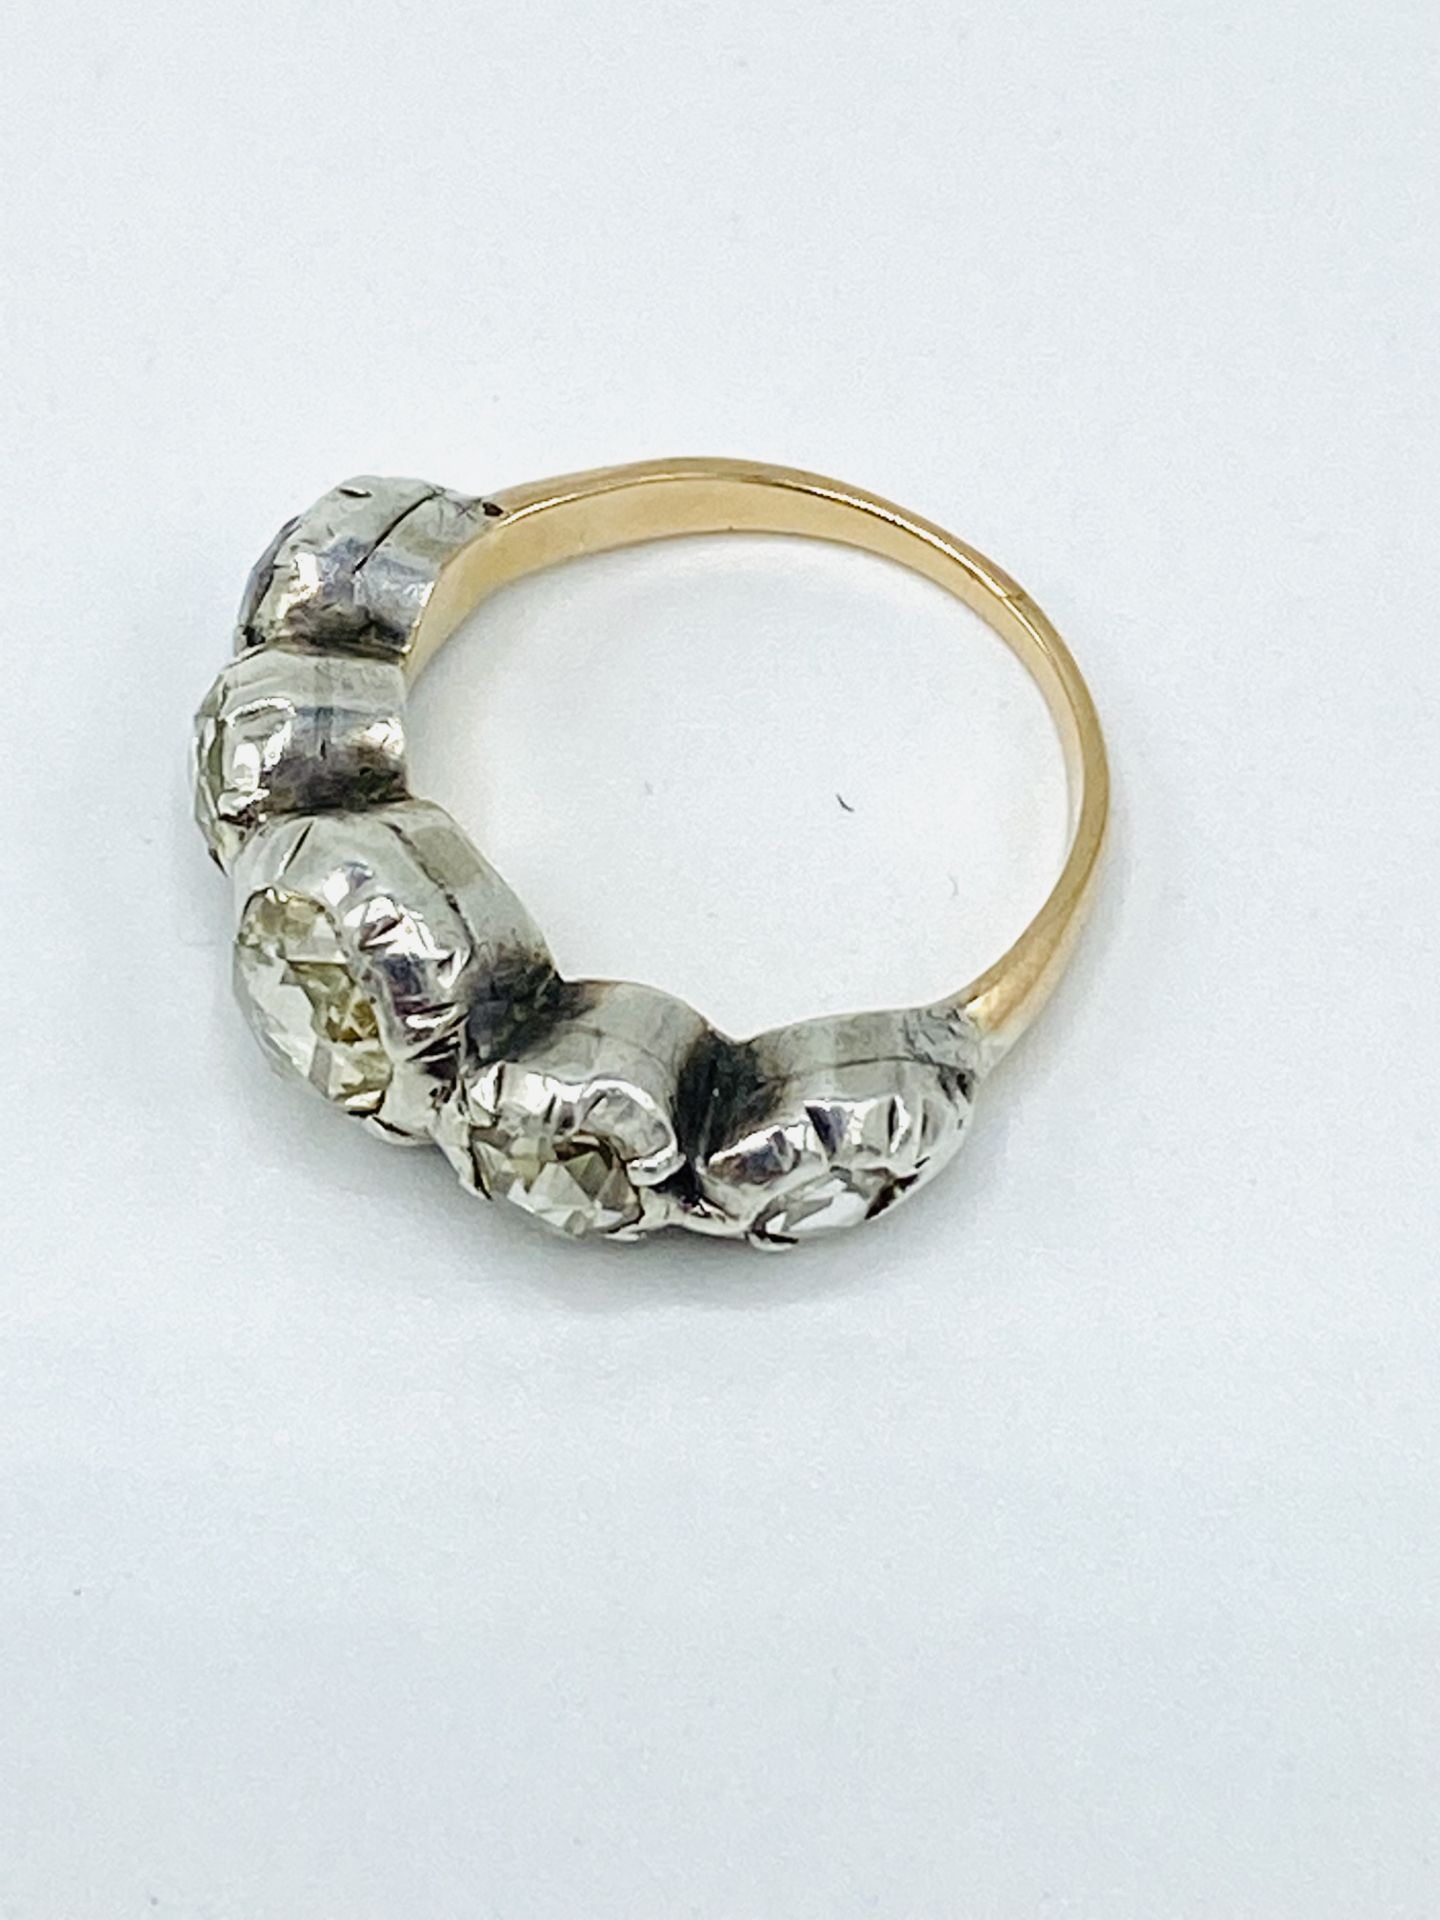 Yellow and white metal ring set with five rose cut diamonds - Image 4 of 4